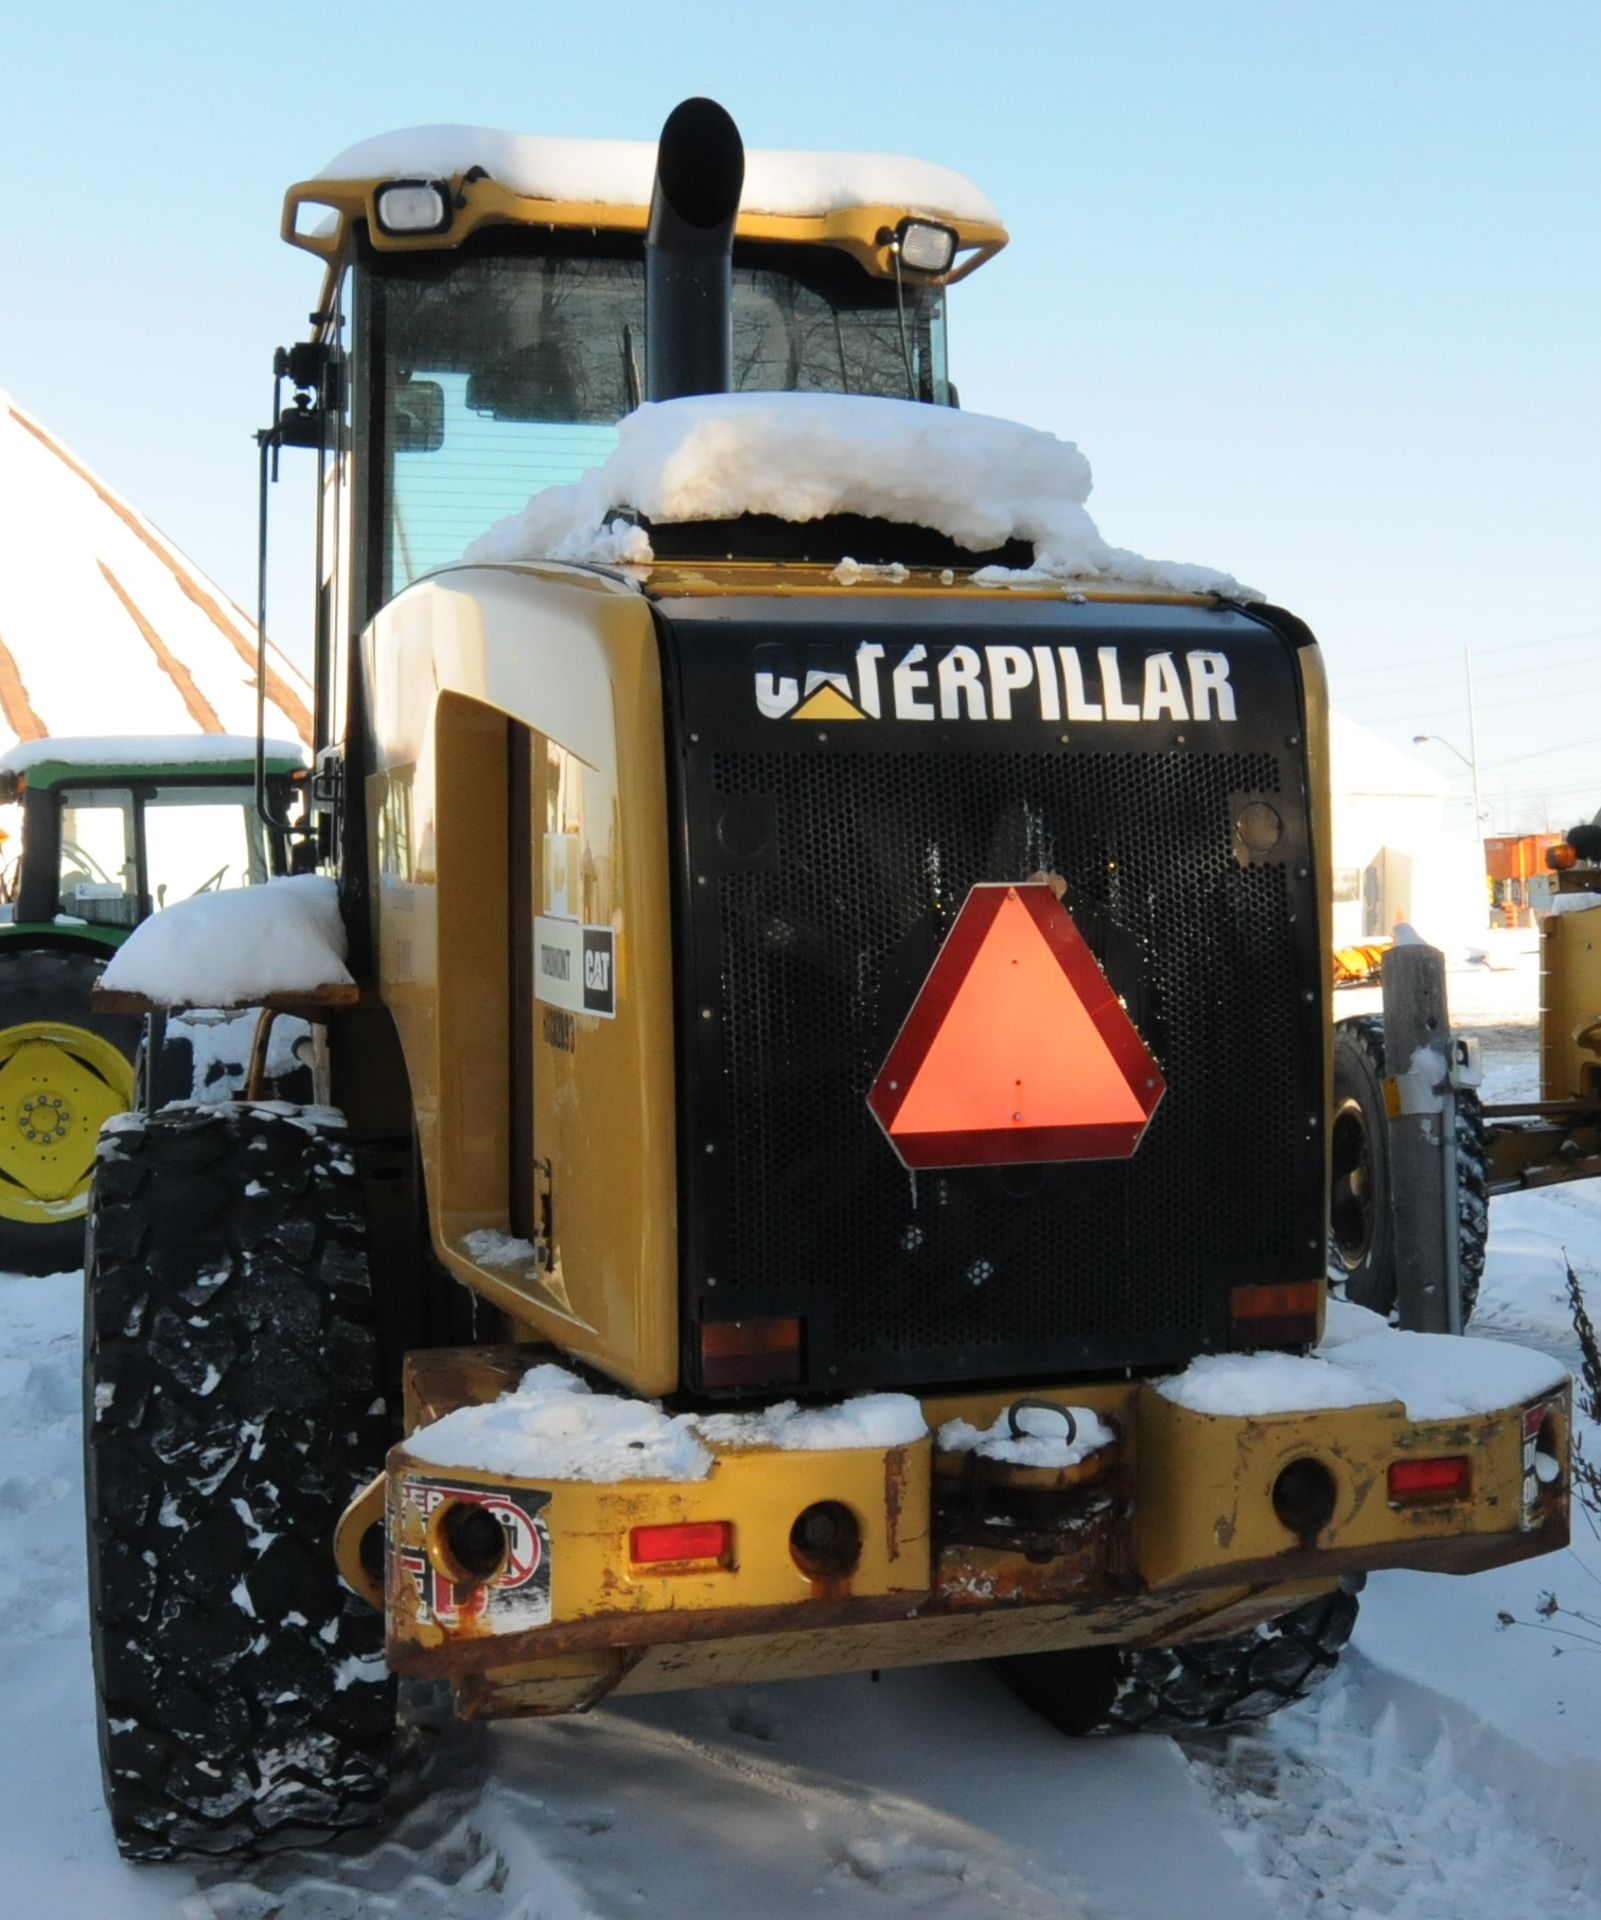 CATERPILLAR (2011) 924H ARTICULATING FRONT END WHEEL LOADER WITH CAT FORK ATTACHMENT, APPROX. 7, - Image 7 of 18